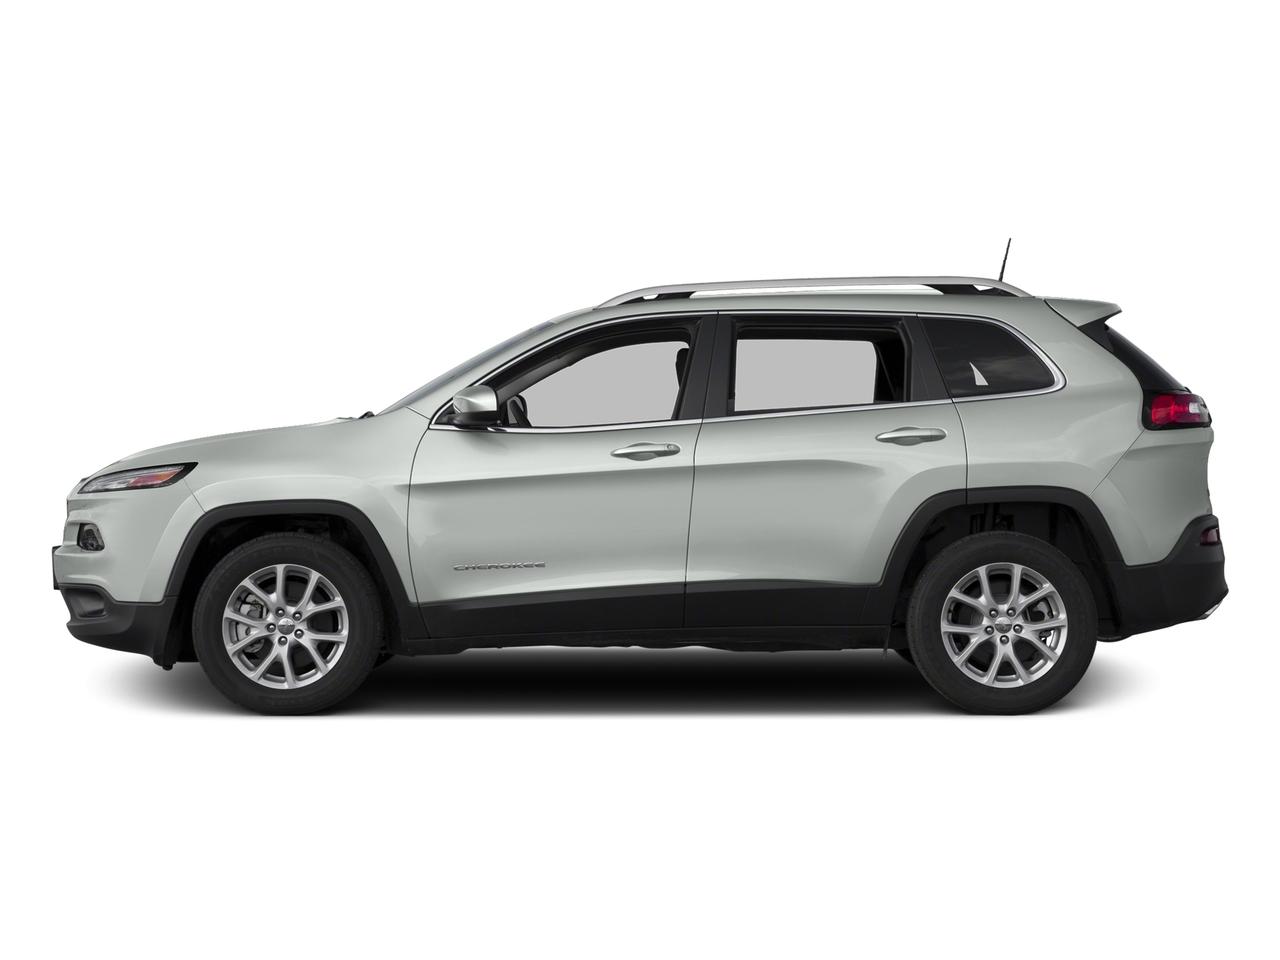 Used 2016 Jeep Cherokee Altitude with VIN 1C4PJMCB0GW192804 for sale in Red Wing, Minnesota